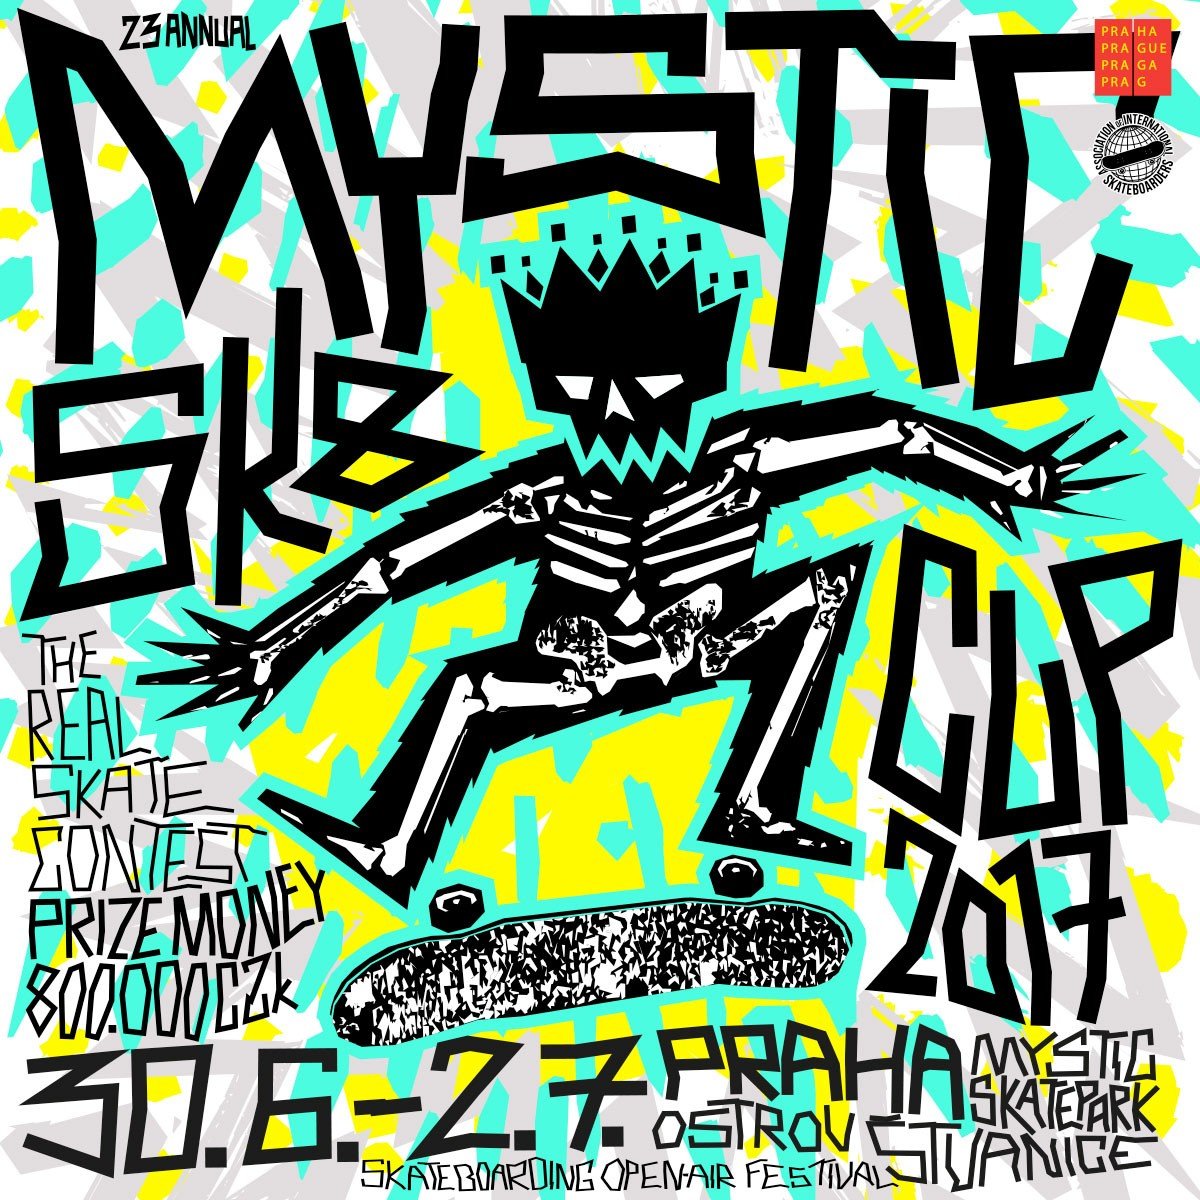 23th ANNUAL MYSTIC SK8 CUP 2017 / JUNE 30 – JULY 2 / the real skate contest